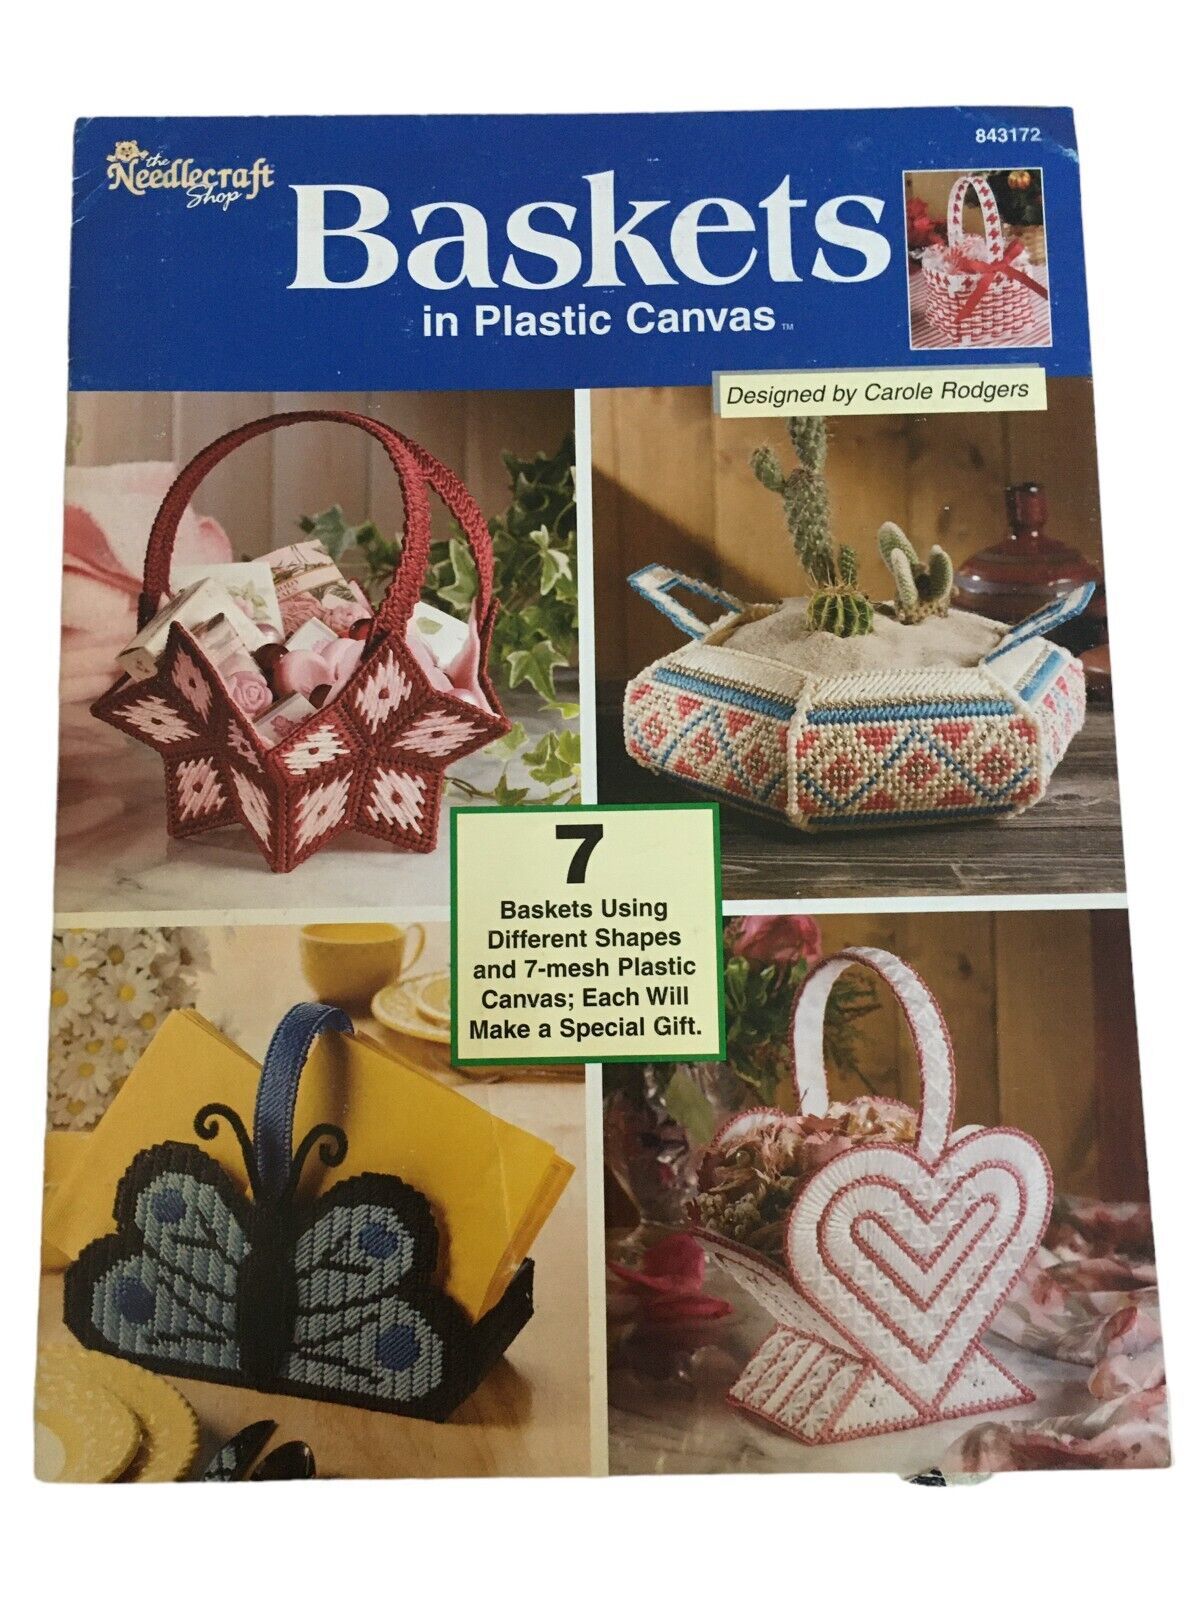 The Needlecraft Shop Baskets in Plastic Canvas Crafts 7 Designs Butterfly Heart - $5.99